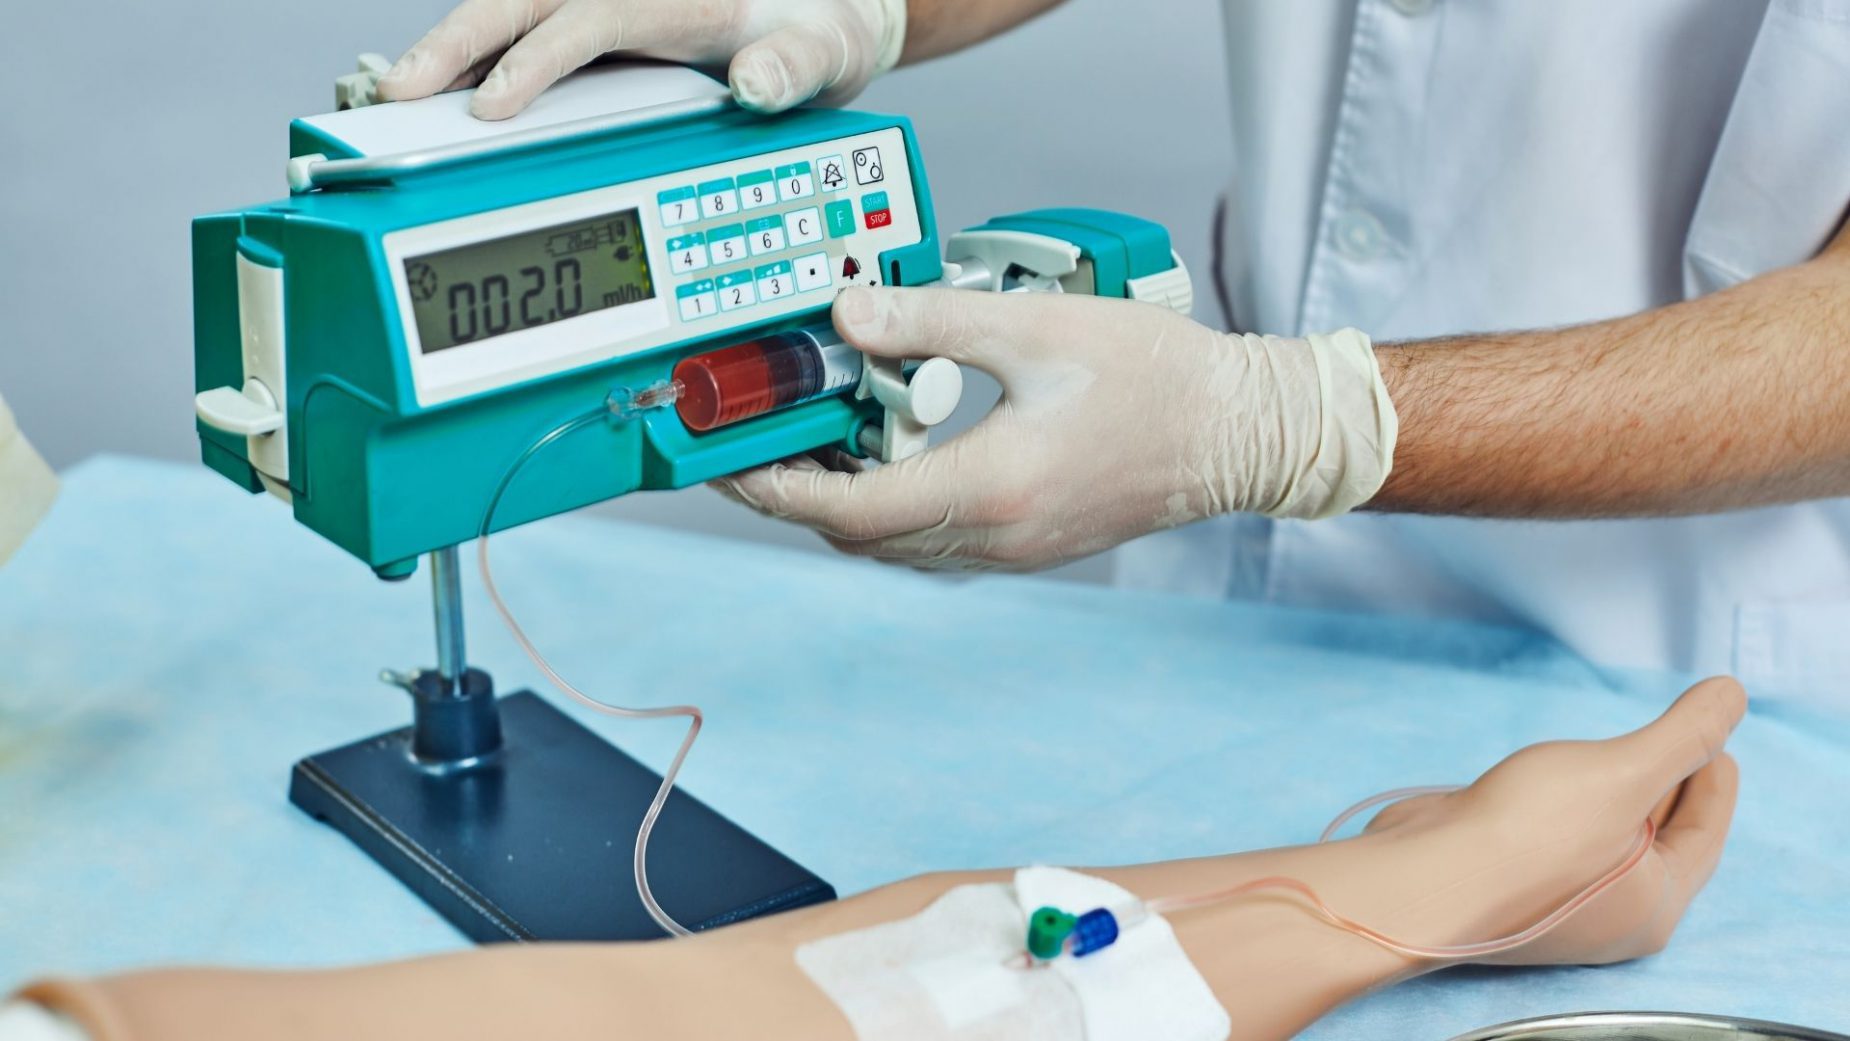 Global Ambulatory IV Infusion Pumps Market Overview And Prospects